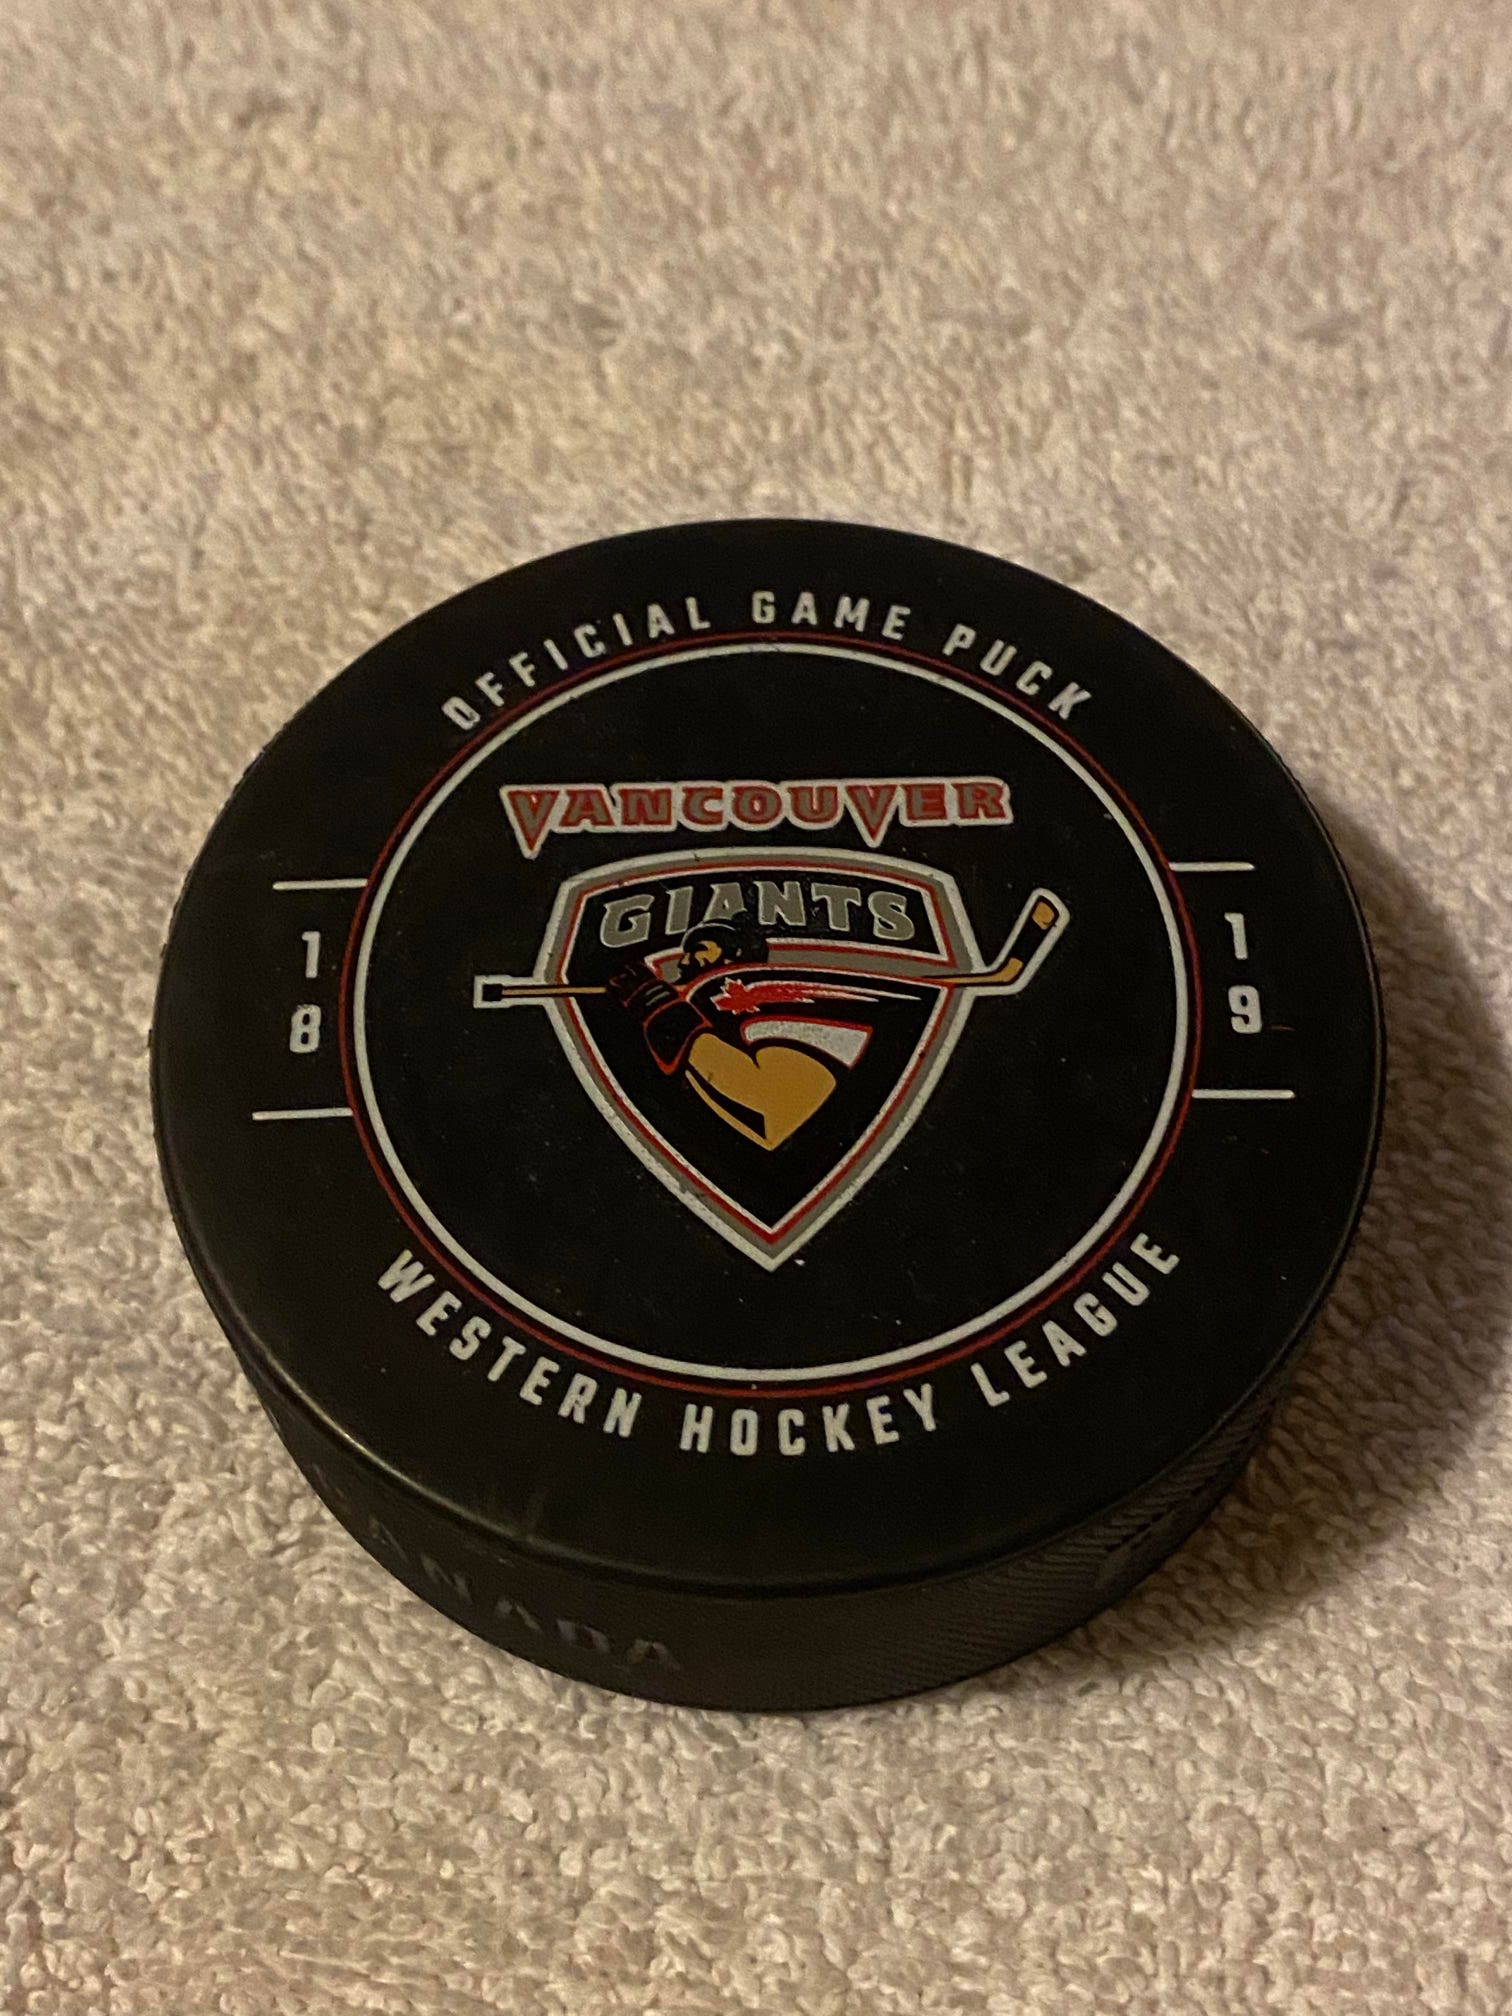 Vancouver Giants Western Hockey League Junior Hockey 2018-2019 Official Game Puck